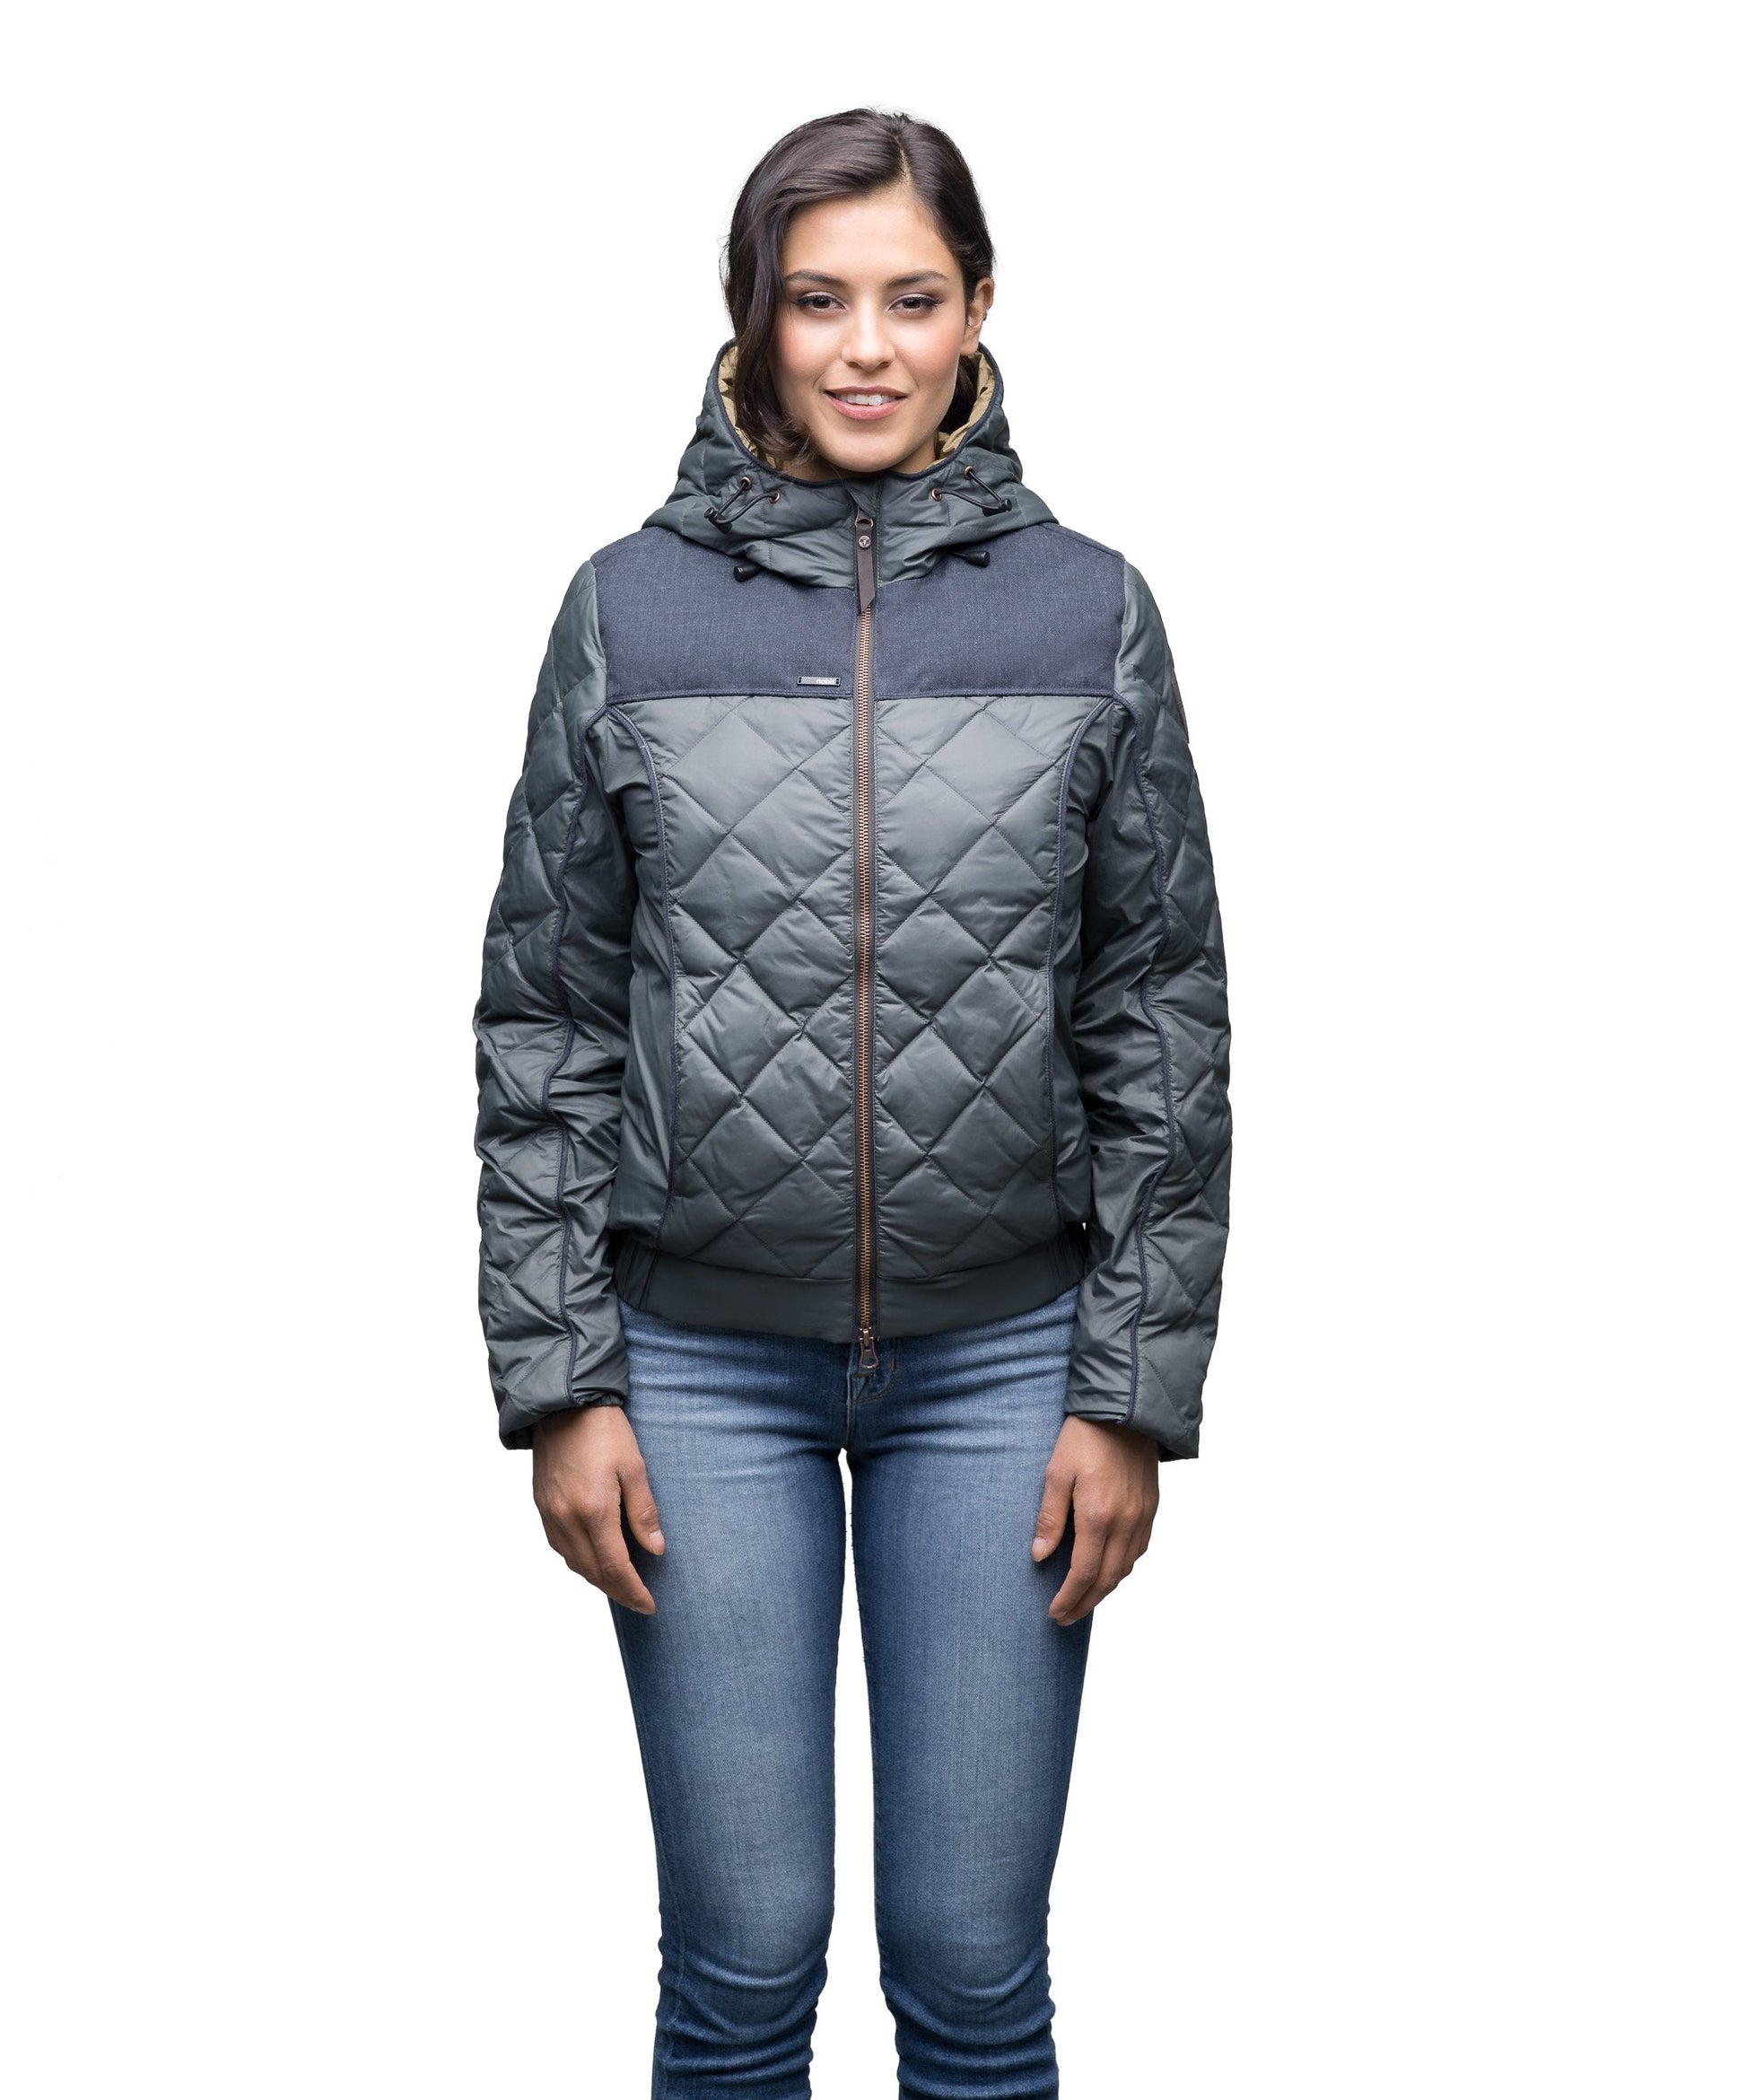 Lightweight women's jacket with hood and quilted pattern featuring a contrasting upper fabric in Foggy Blue